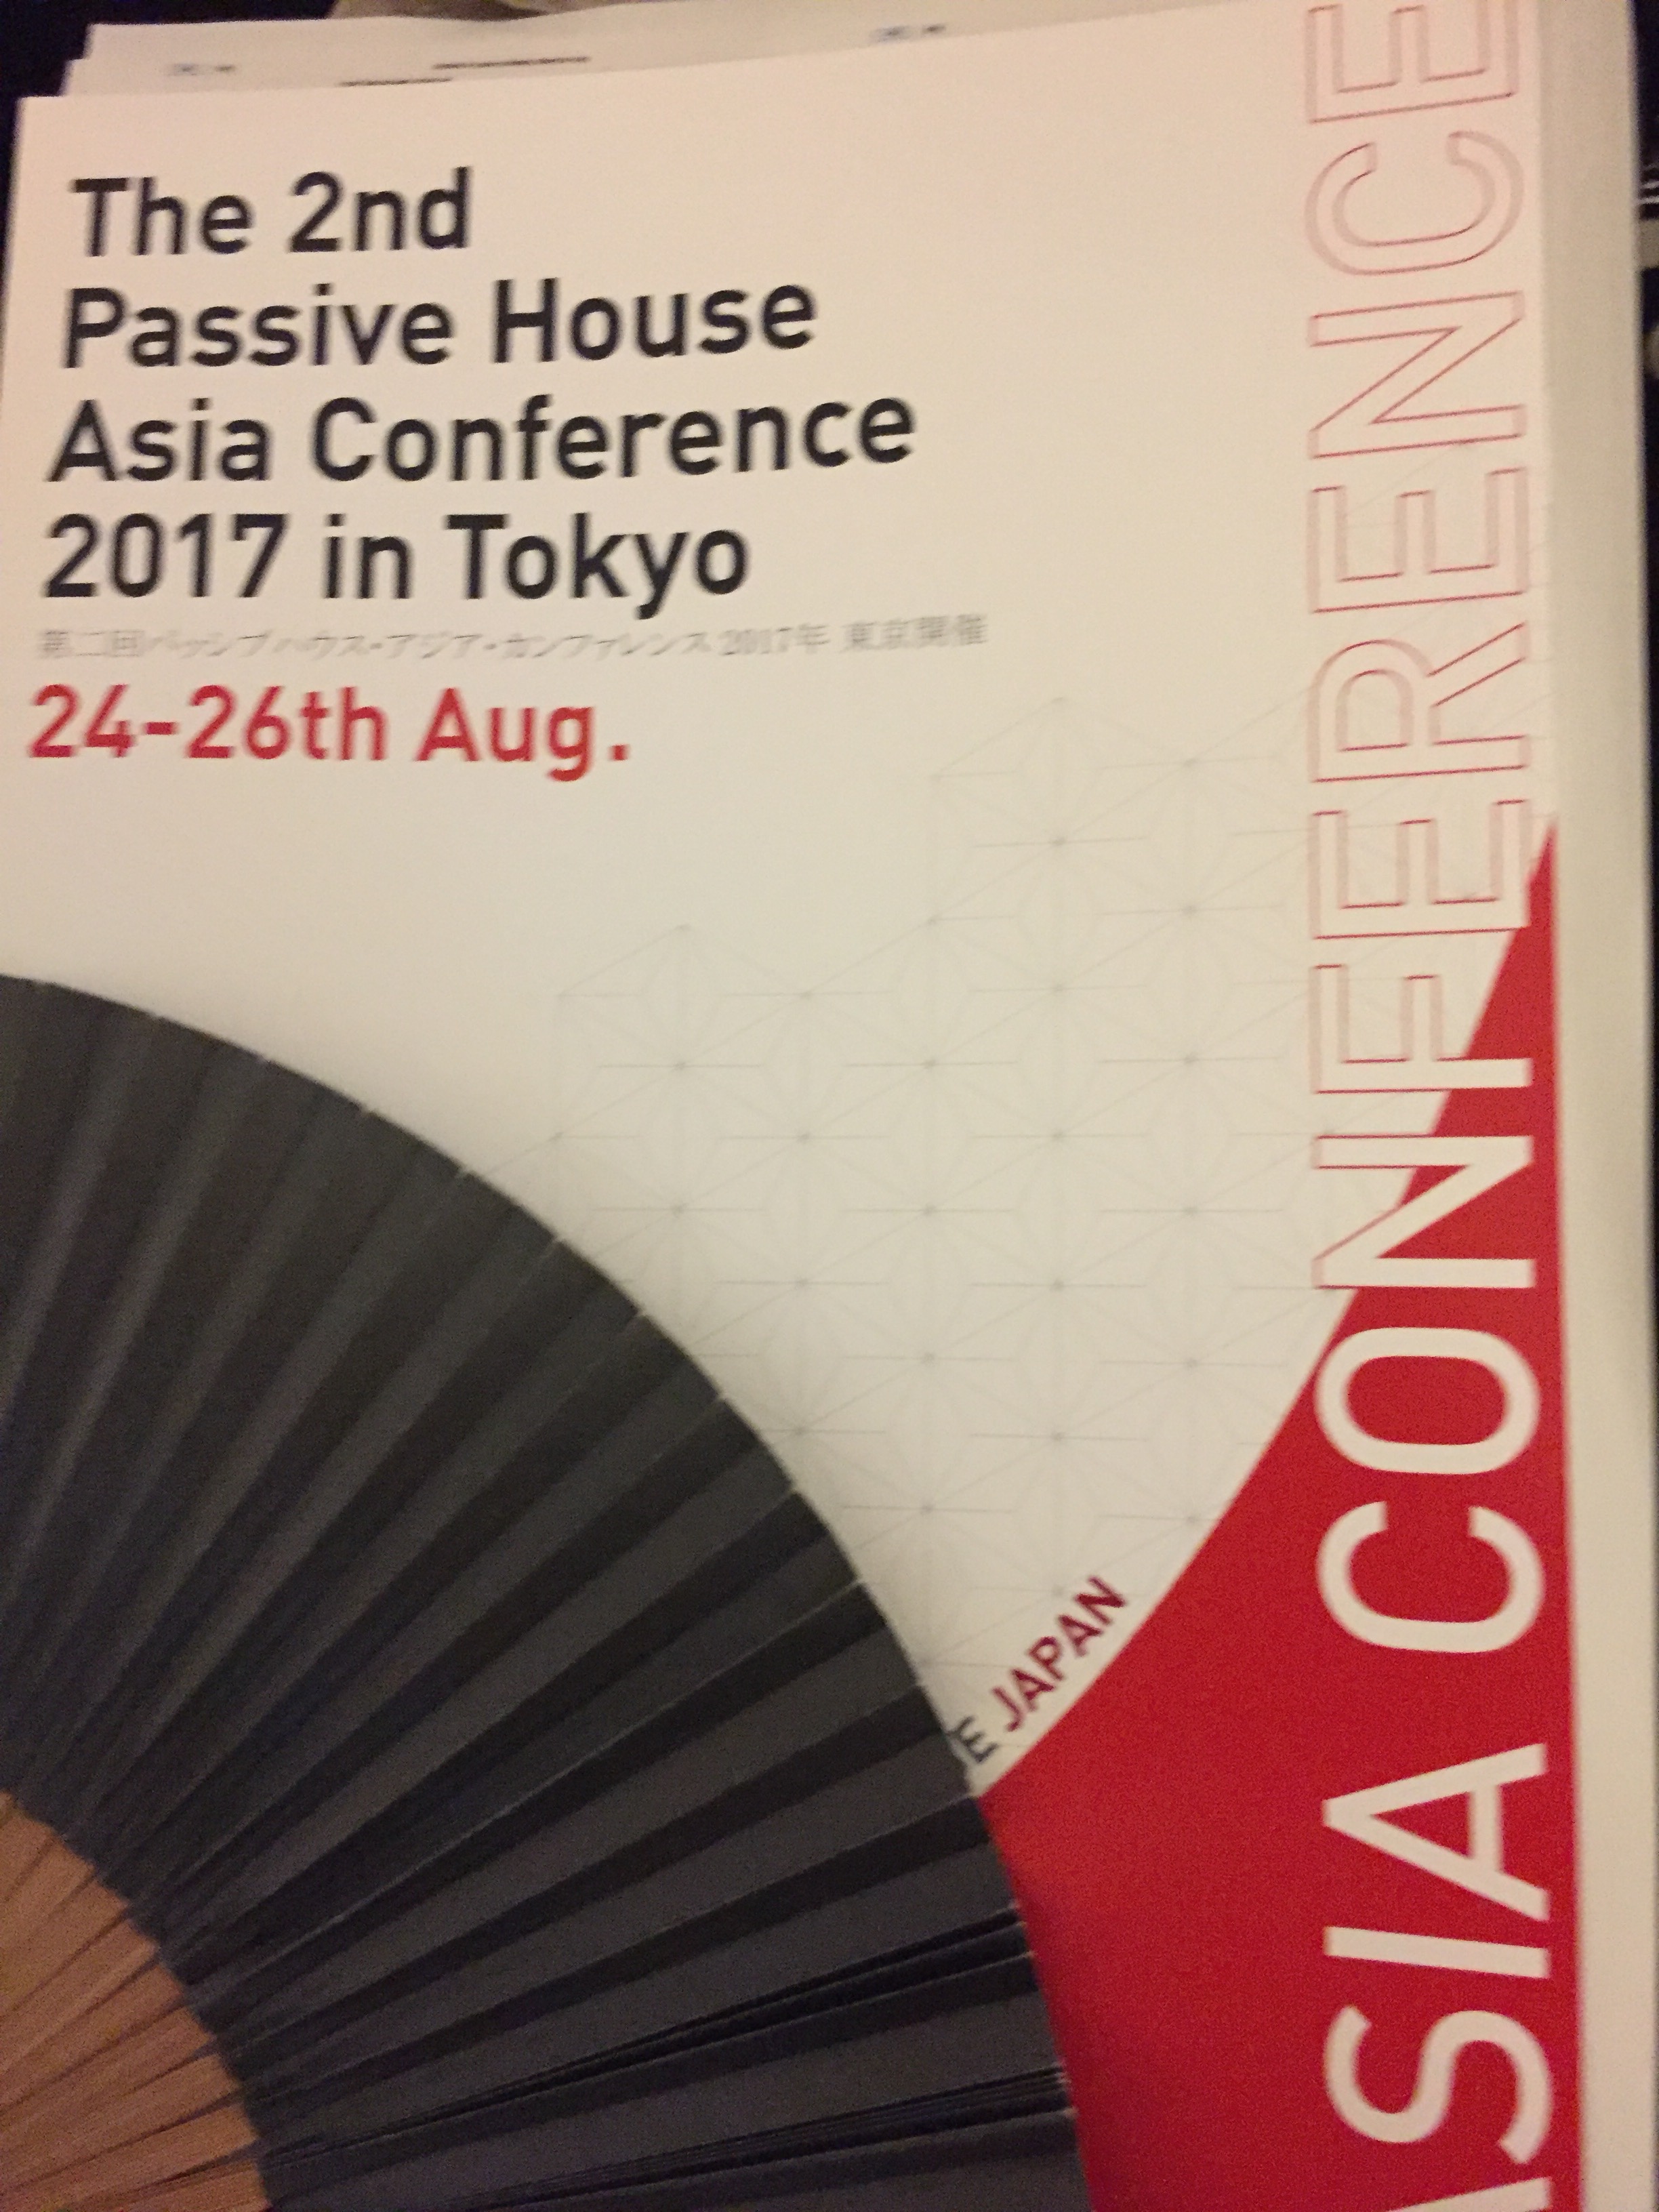 The 2nd Passive House Asia Conference 2017 in Tokyo 参加　2泊3日